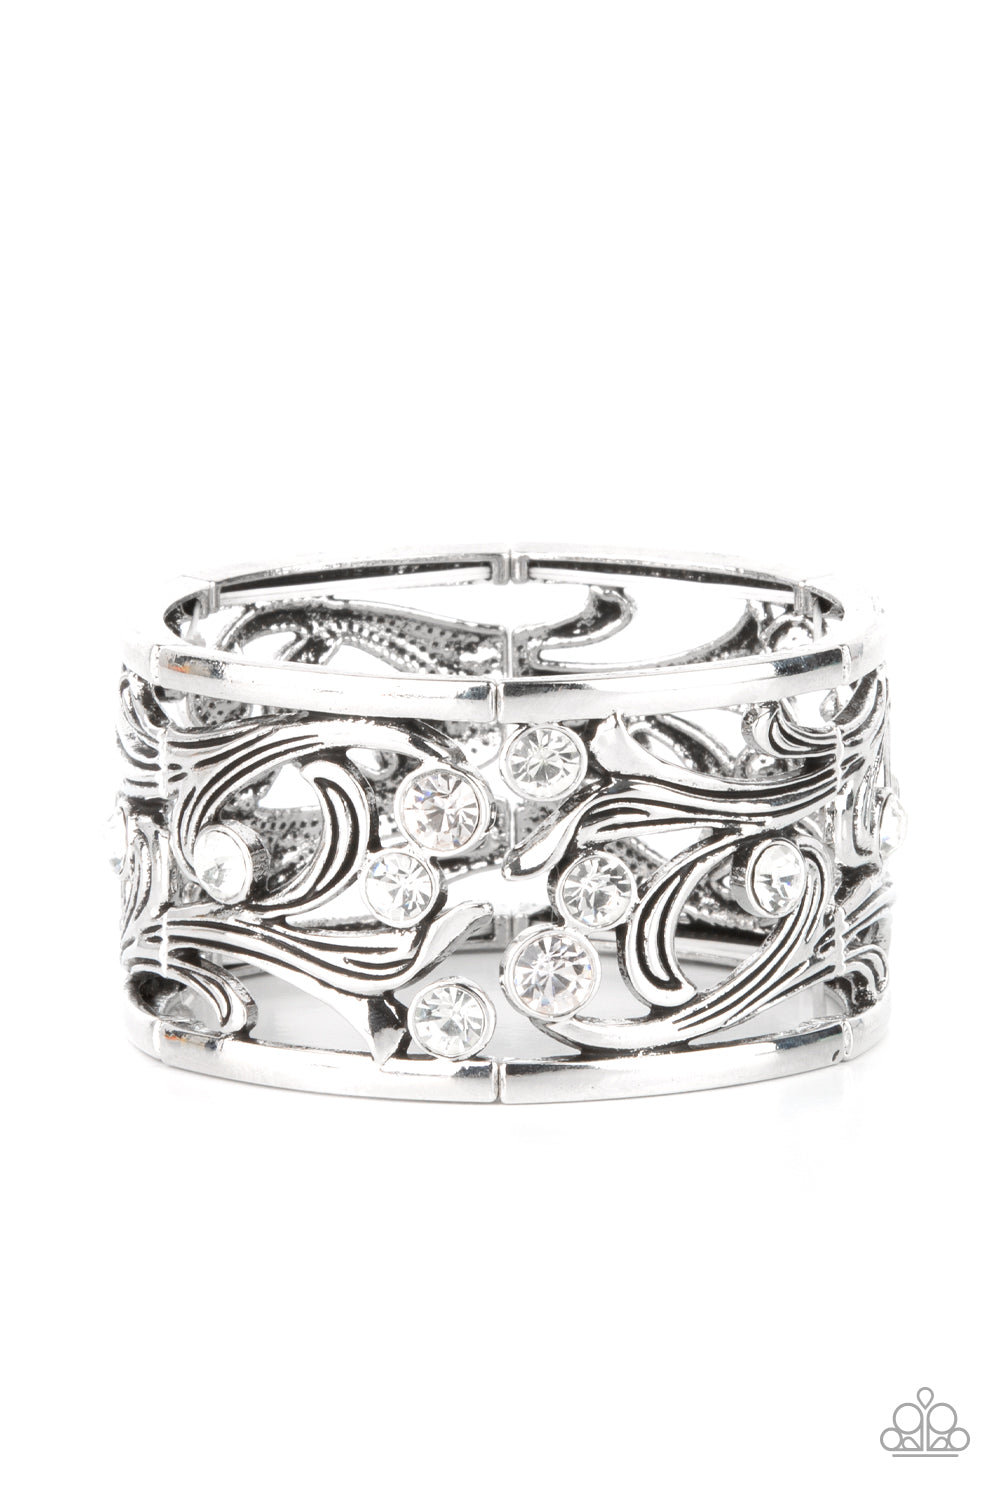 Garden Masquerade White Bracelet - Paparazzi Accessories  A smattering of brilliant white rhinestones scatter across an airy floral frame among vine-like filigree. The romantically whimsical frames are threaded along stretchy bands and repeat around the wrist for an enchanting display.  All Paparazzi Accessories are lead free and nickel free!  Sold as one individual bracelet.